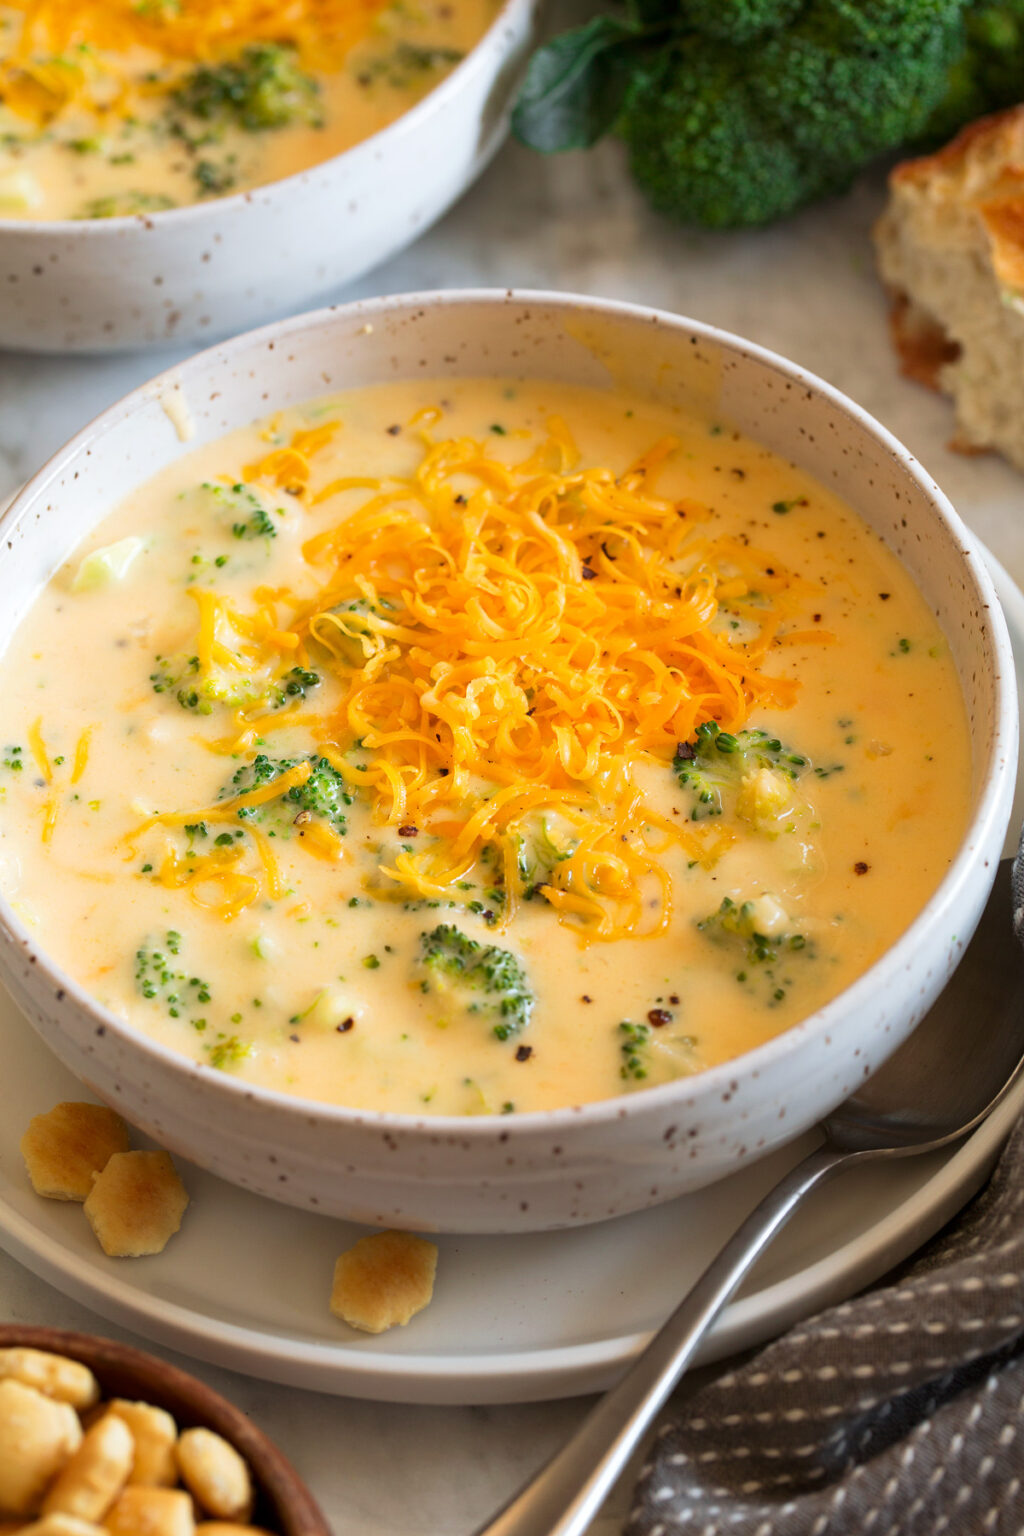 My Favorite Broccoli Cheese Soup